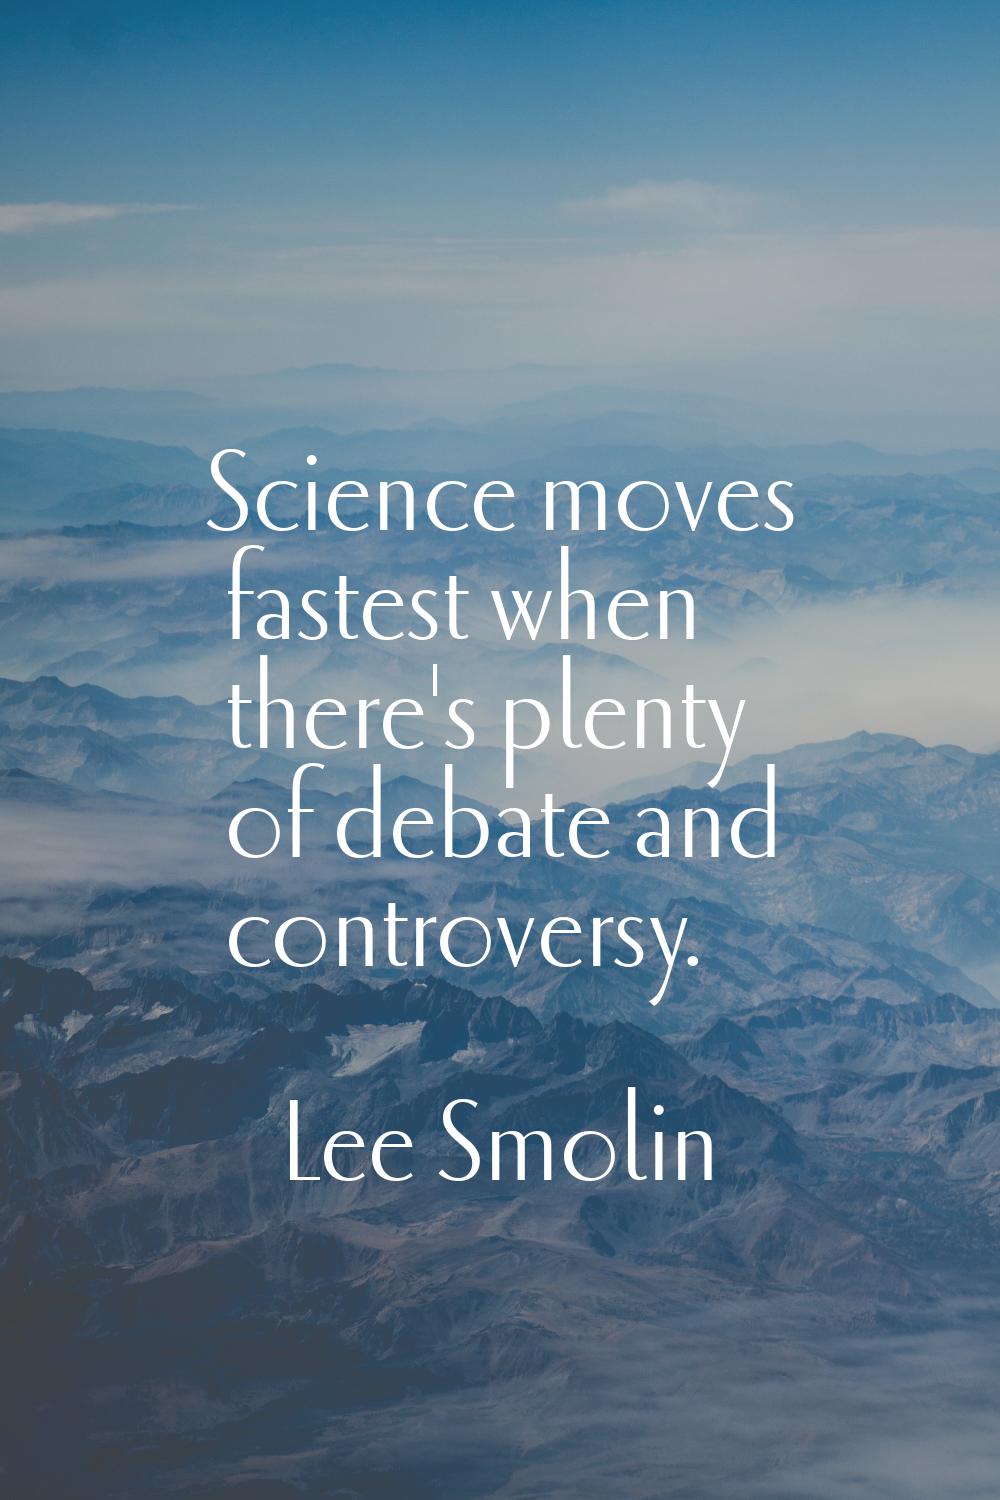 Science moves fastest when there's plenty of debate and controversy.